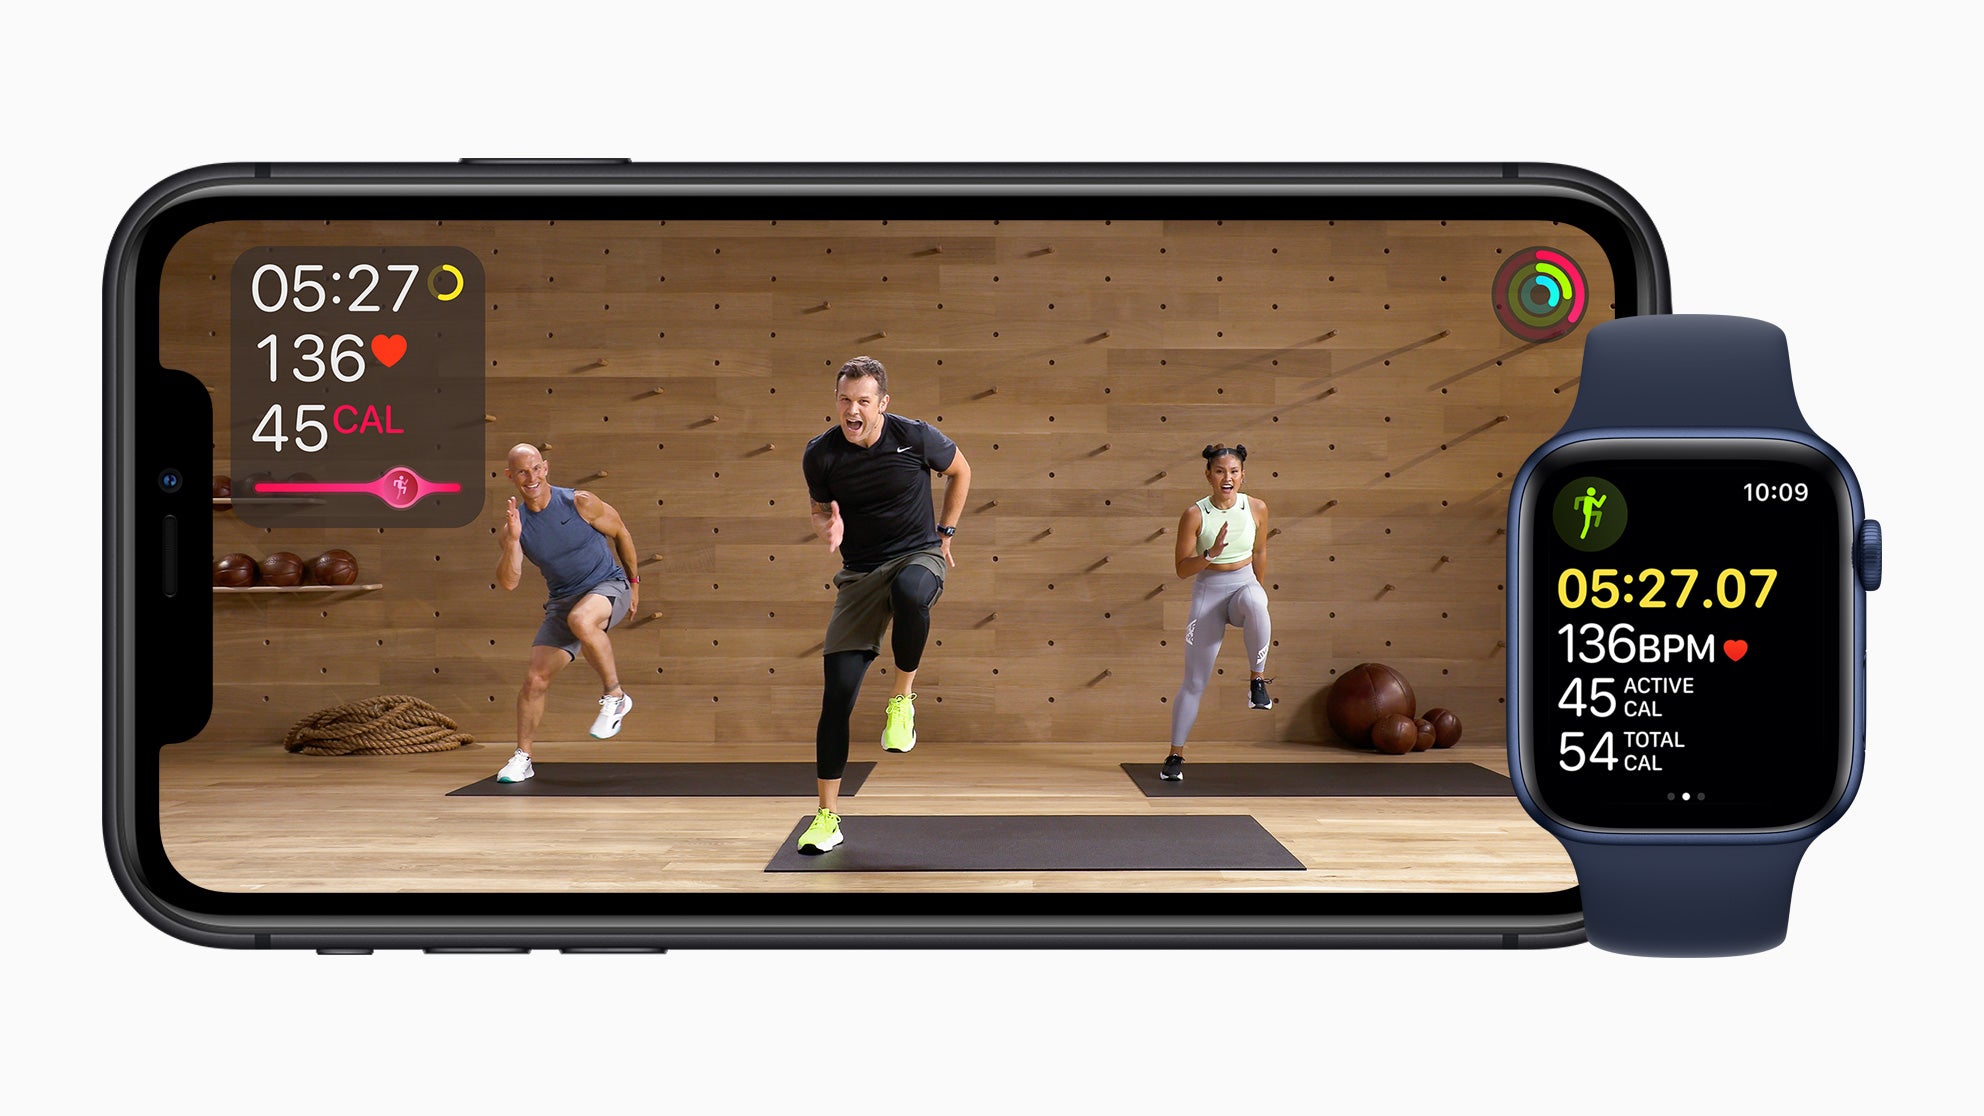 Apple Fitness+: A new engaging and personalized fitness experience comes to life with Apple Watch